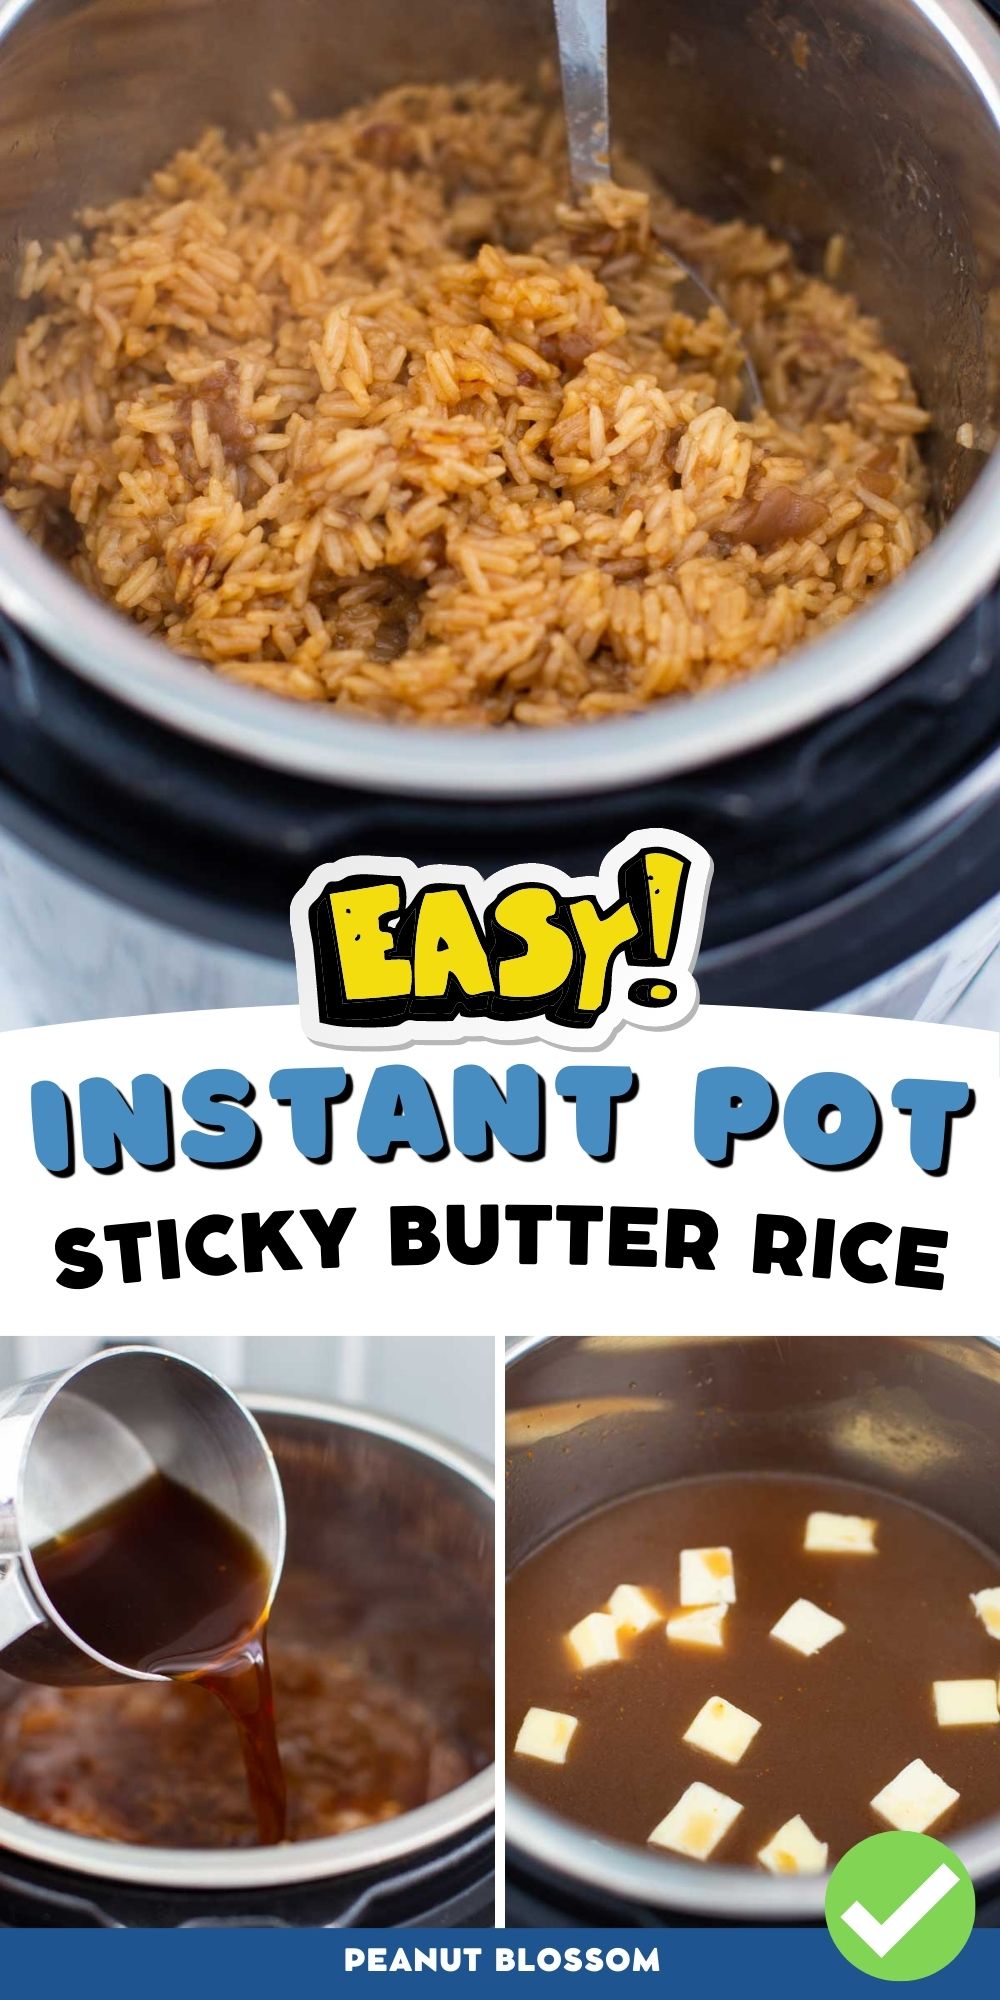 The rice in 3 stages of cooking in the Instant Pot.